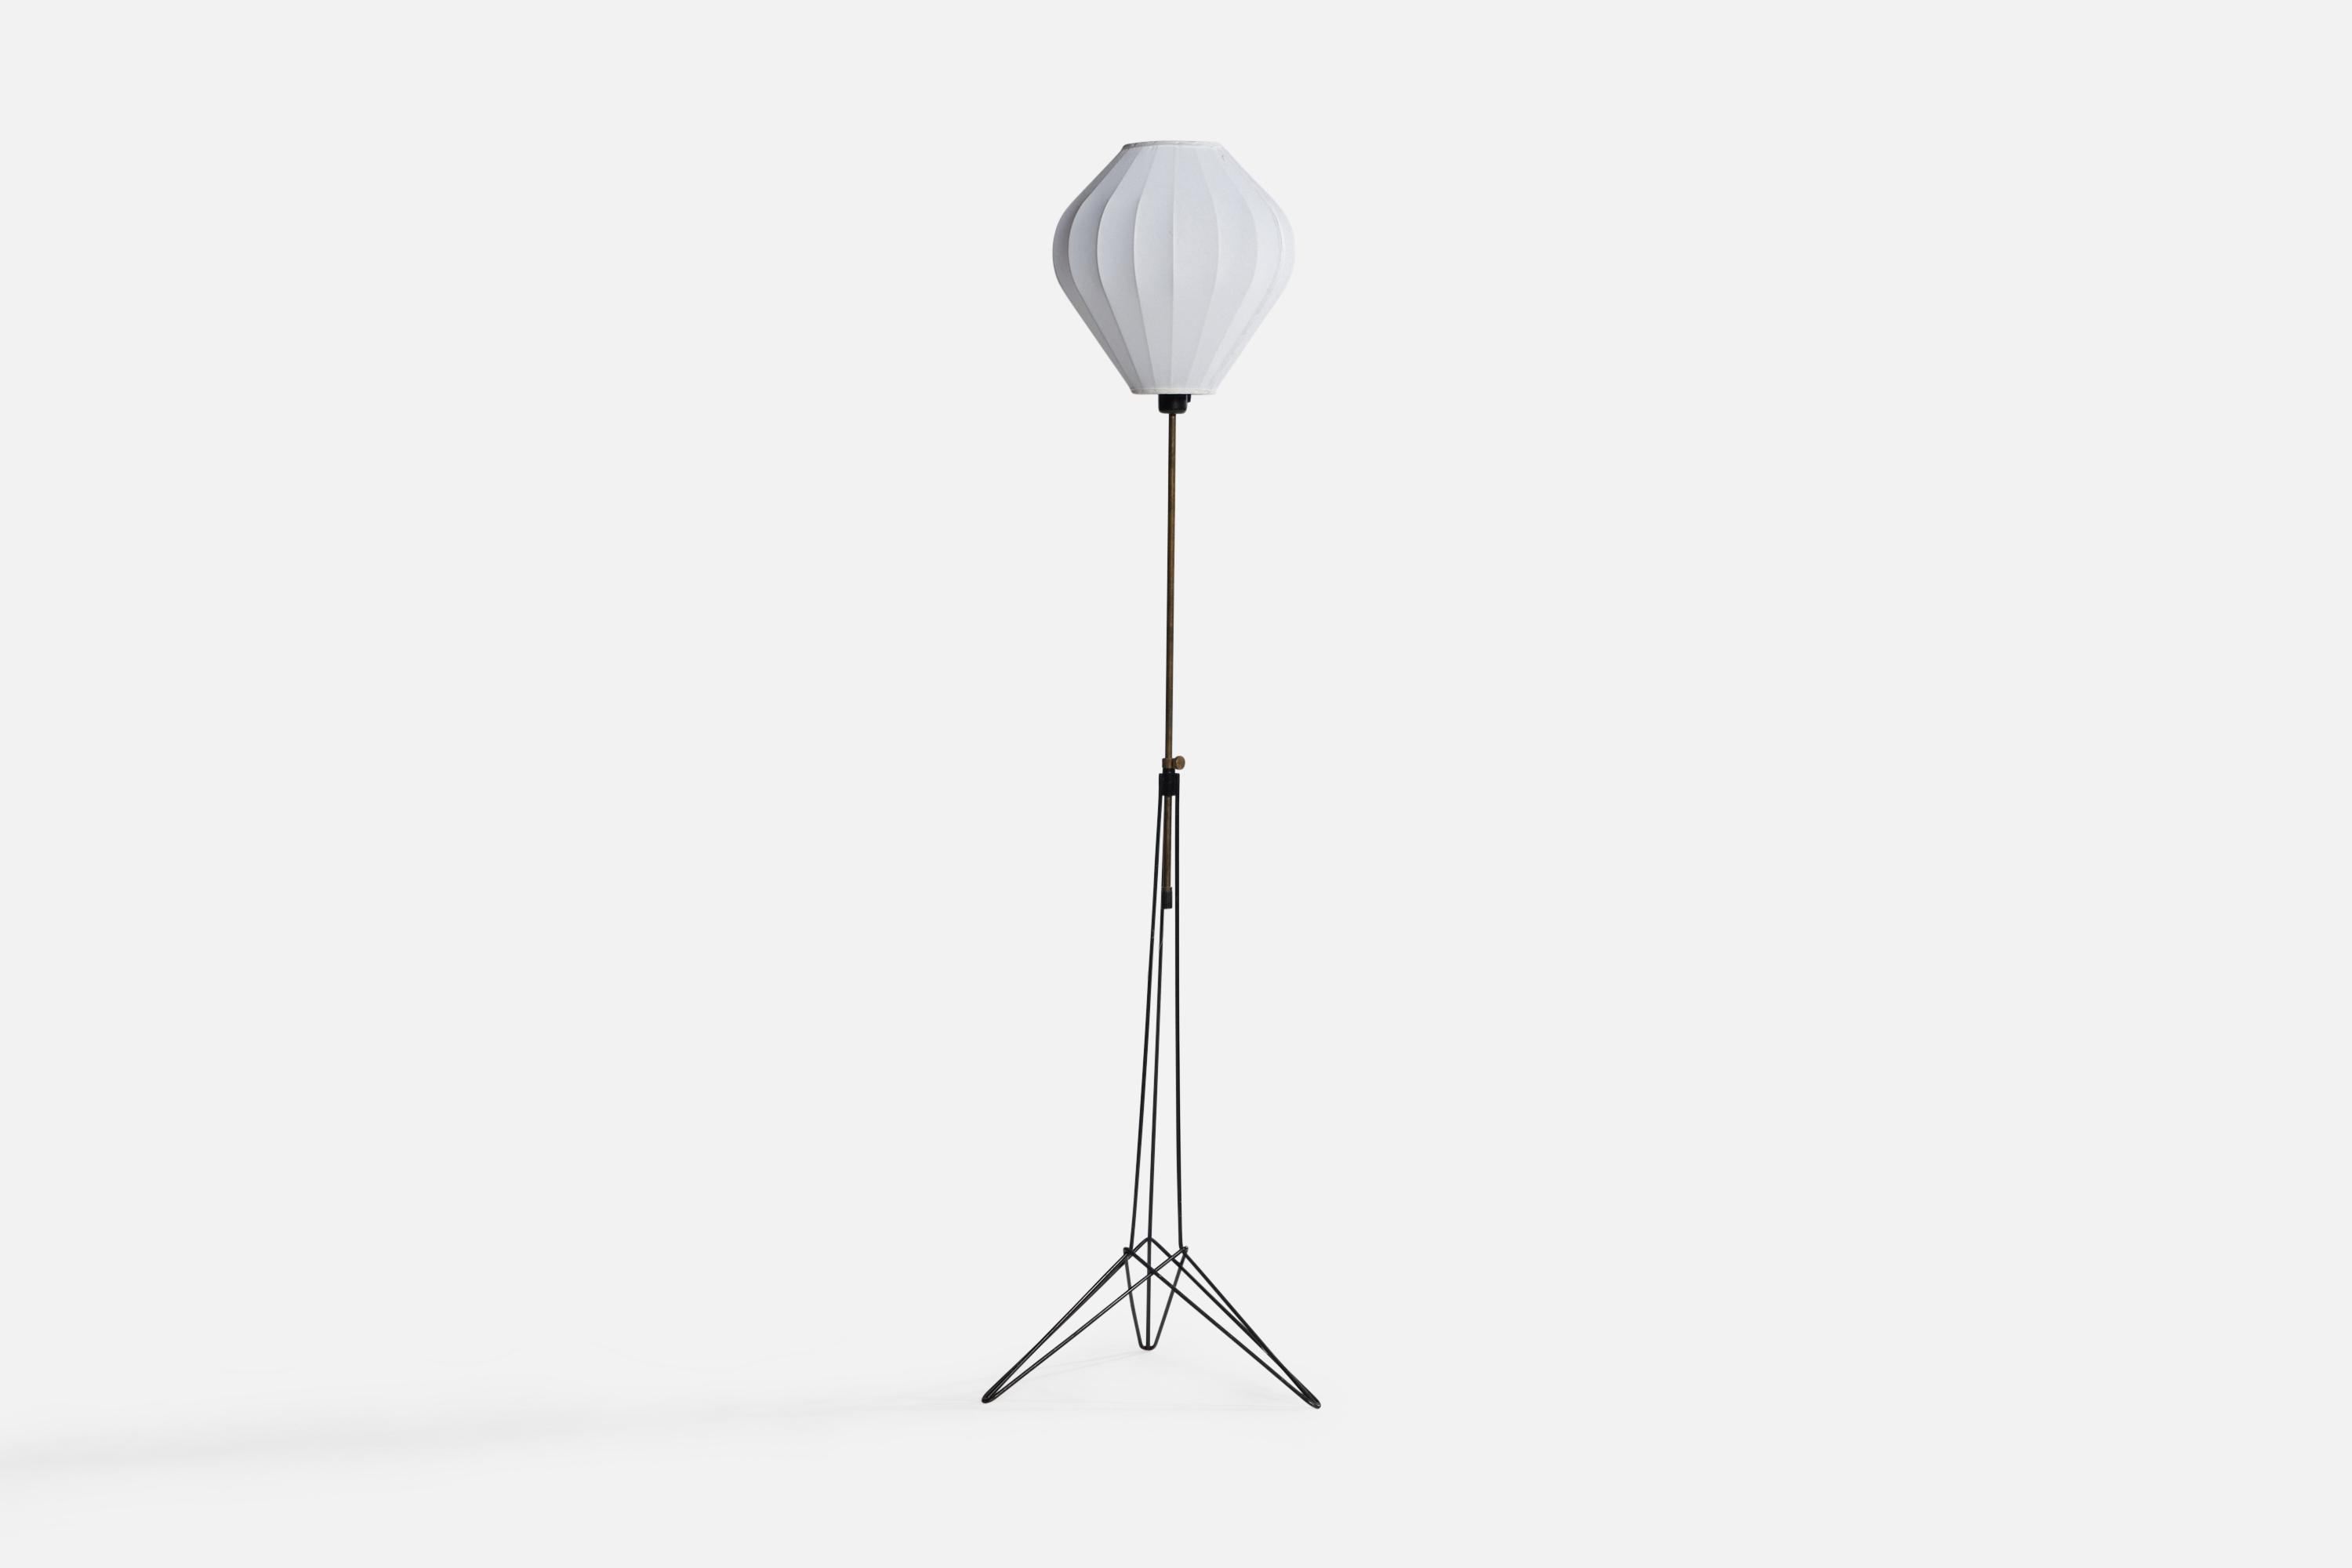 A brass, black-lacquered metal and fabric floor lamp designed and produced in Sweden, c. 1950s.

Overall Dimensions (inches): 61.25” H x 16” W x 16” D. Stated dimensions include shade.
Bulb Specifications: E-26 Bulb
Number of Sockets: 1
All lighting